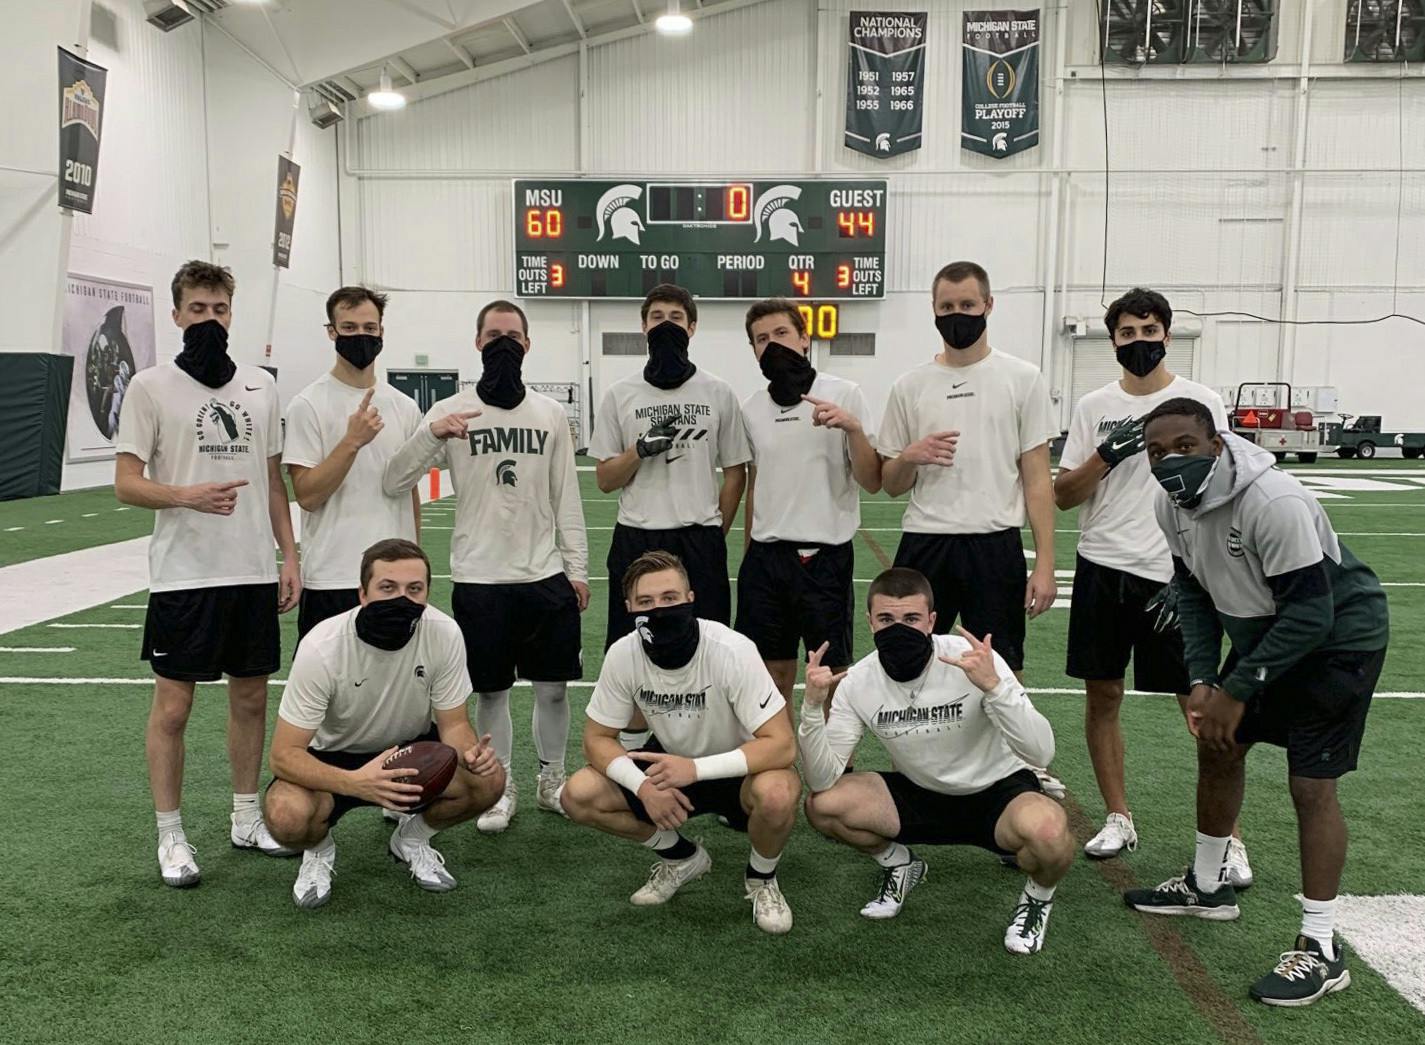 <p>Michigan State&#x27;s student equipment managers pose at the Skandalaris Football Center on the indoor practice field. </p><p></p><p>Pictured, back row (from left to right): Andrew Campbell, Michael Grodi, Dan Kalchik, Liam Ryan, Ben Connelly, Ryan Campbell, Nick Franz and Markael Butler. Front row (from left to right): Ryan Daugherty, Mason Ruddy and Casey Edwards. (Photo courtesy: Ryan Daugherty, Michigan State Class of 2022)</p>